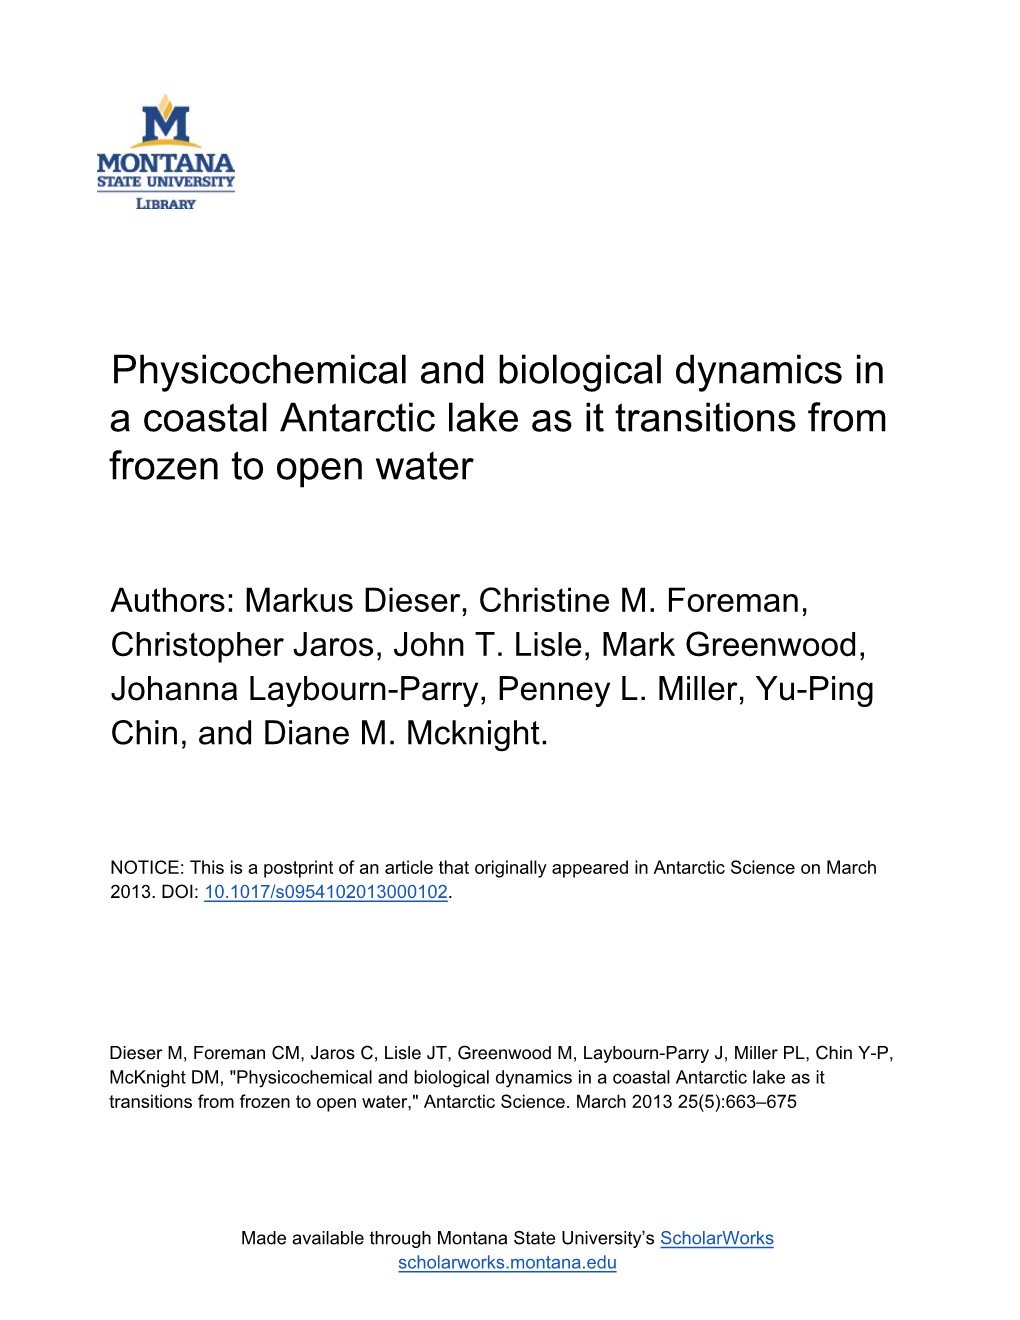 Physicochemical and Biological Dynamics in a Coastal Antarctic Lake As It Transitions from Frozen to Open Water